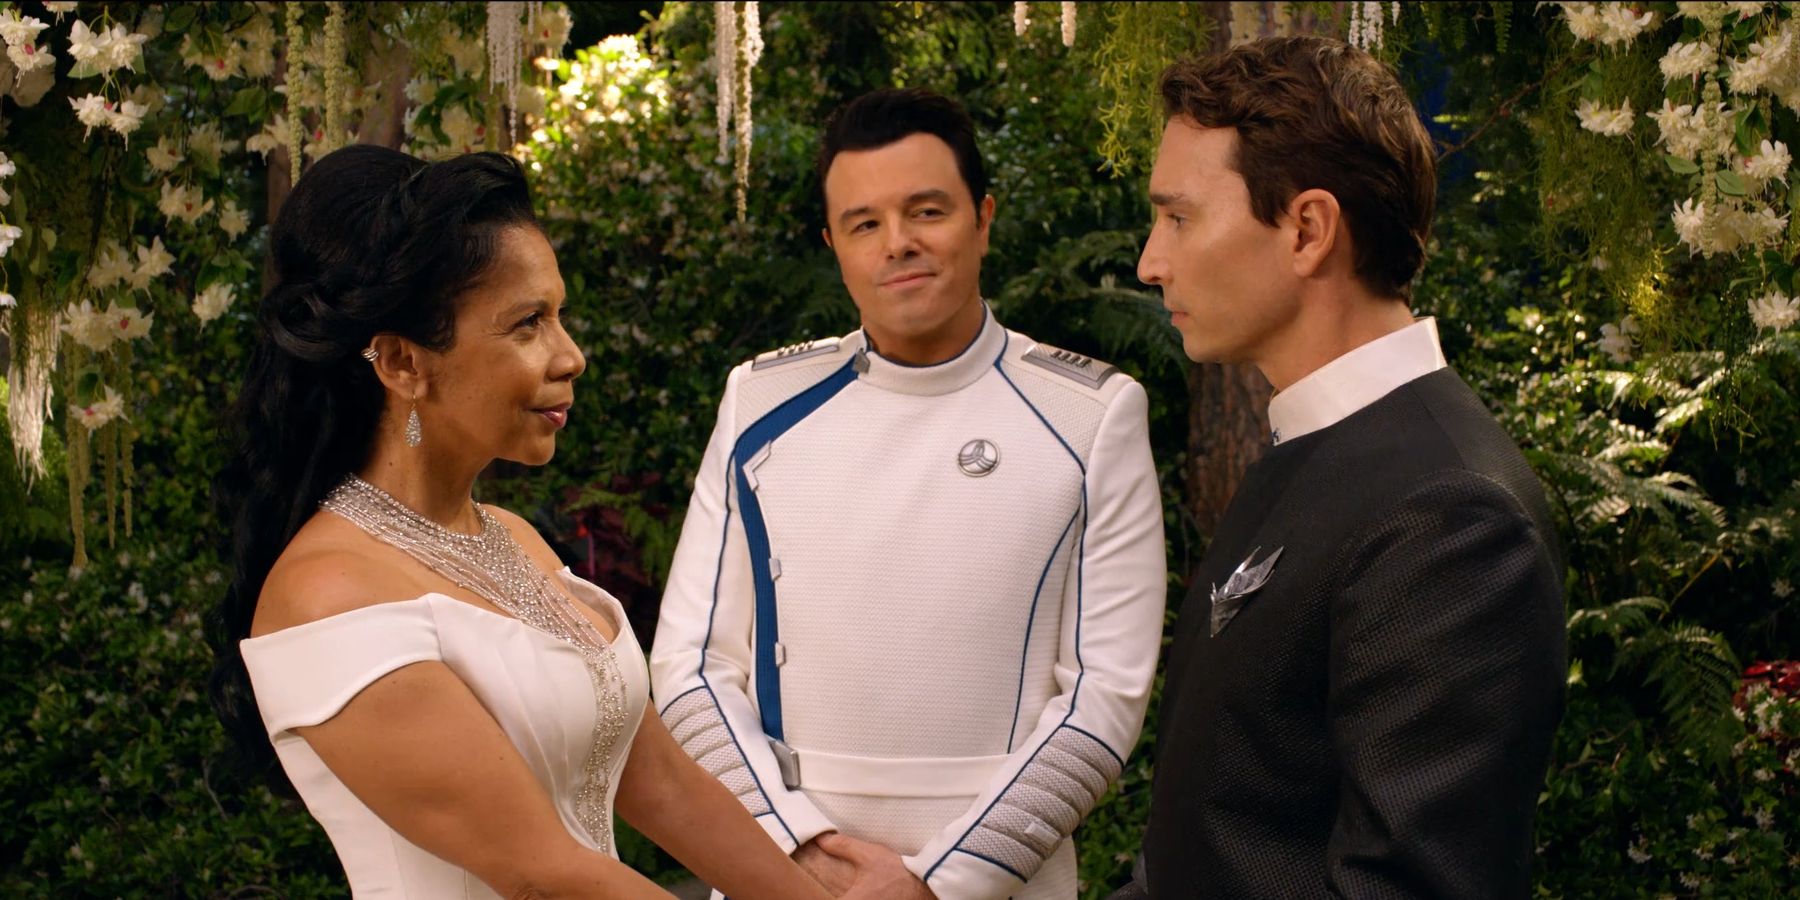 Isaac and Claire get married in The Orville season 3 finale